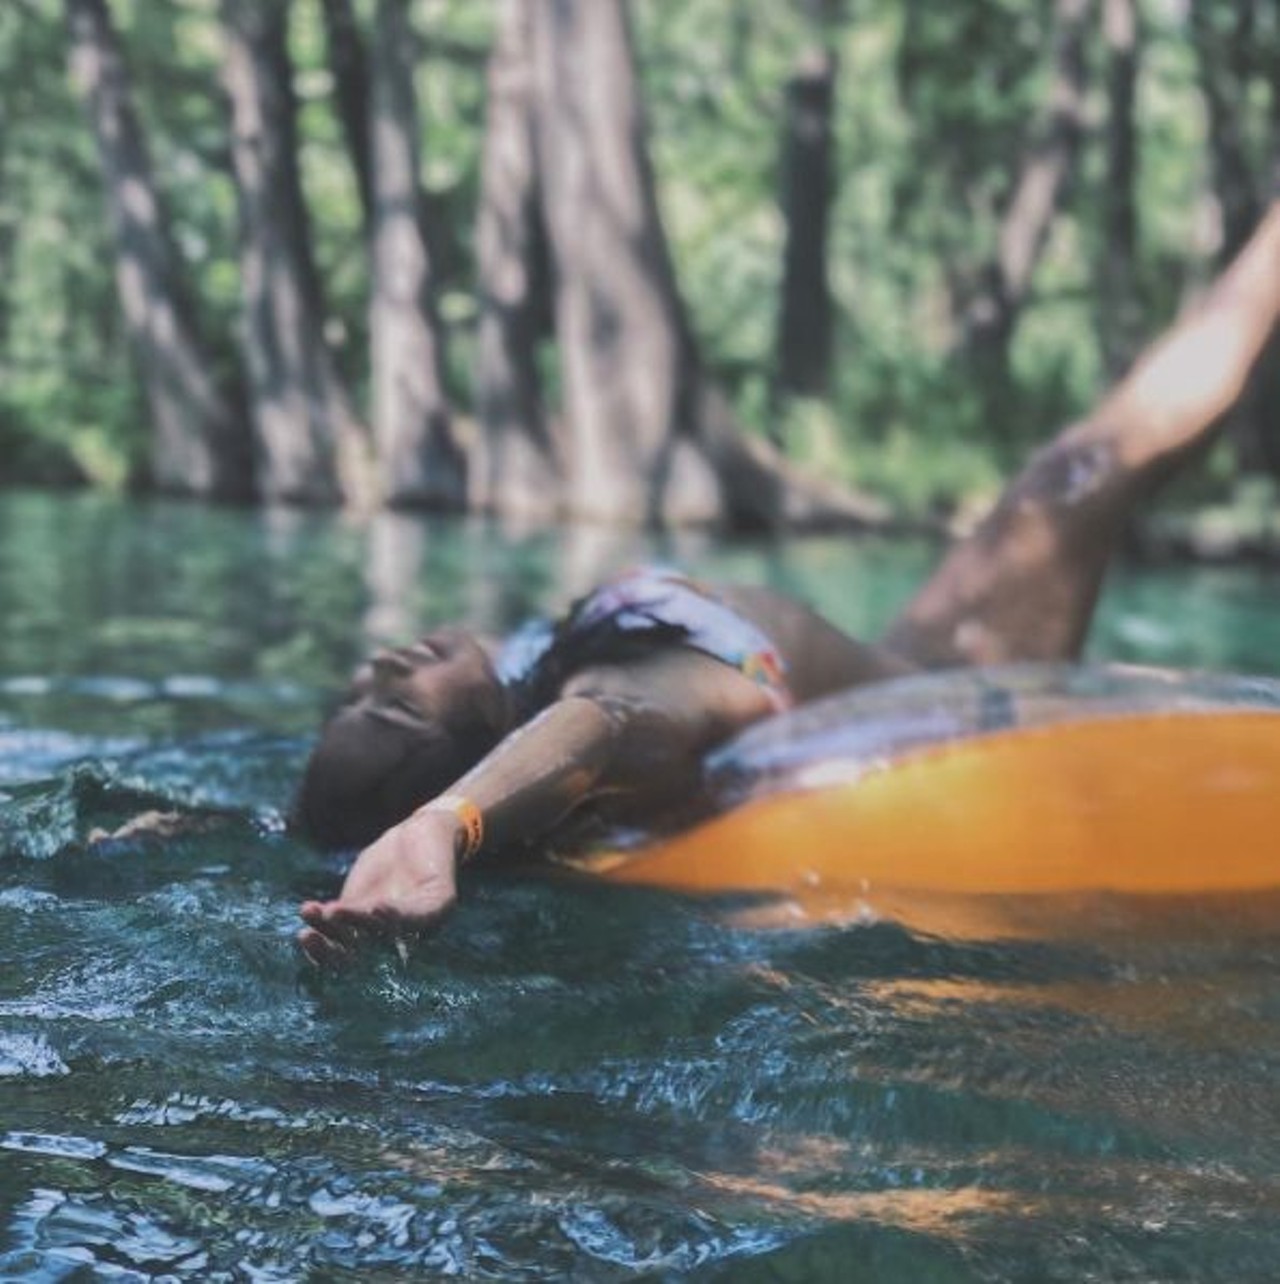 Wimberly Blue Hole
100 Blue Hole Lane, Wimberley, (512) 660-9111
The Blue Hole is a serene natural hideaway where you can relax and get your last summer kicks in before swimming season ends. Take a peek at their website to view their affordable admission fees. 
Photo via Instagram, kaleeemorgann